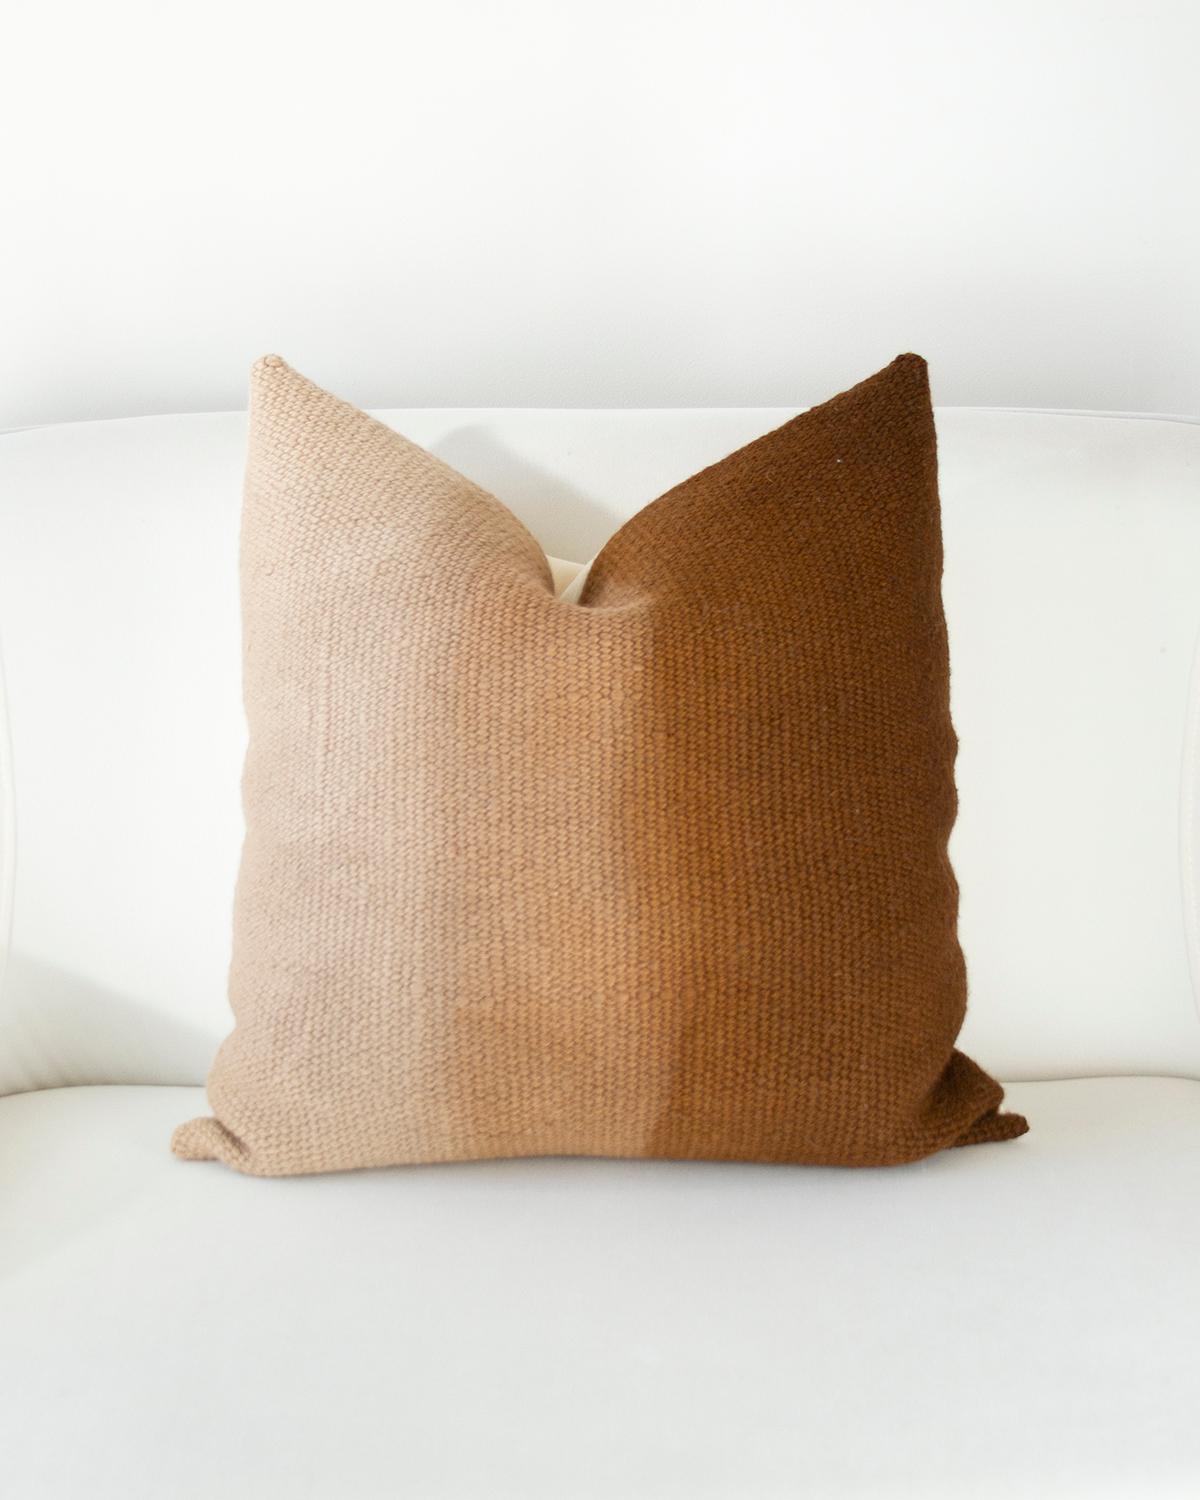 Argentine Matiz Brown Ombre Throw Pillow Handwoven Textured Sheep Wool For Sale